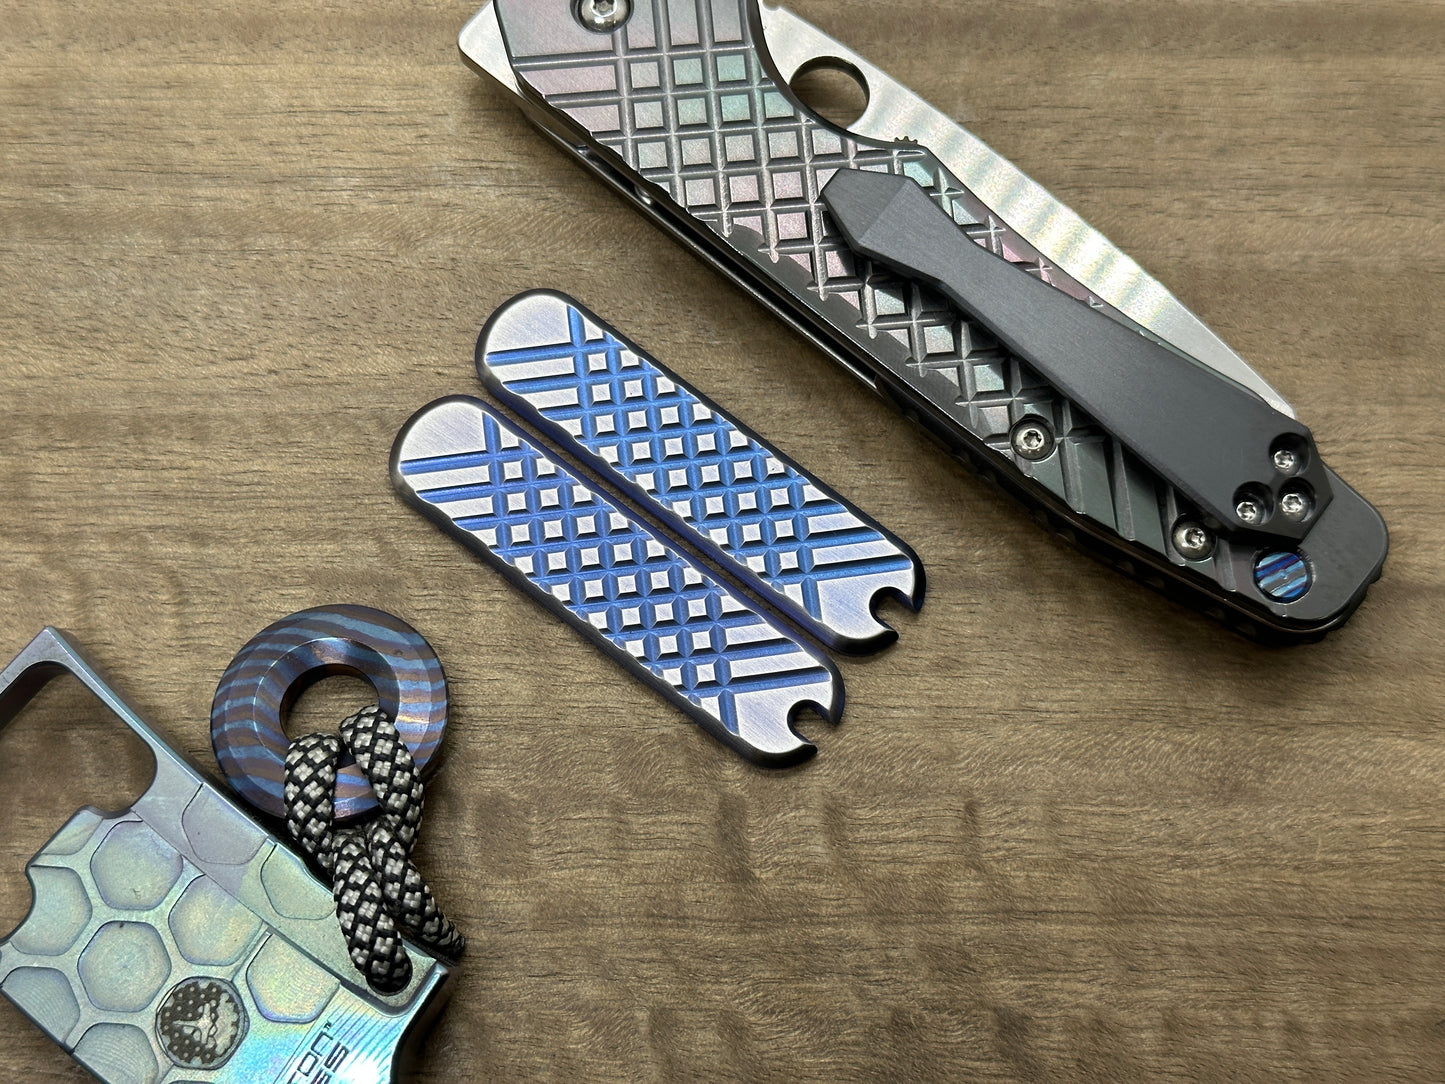 2-Tone BLUE ano & Brushed FRAG milled 58mm Titanium Scales for Swiss Army SAK